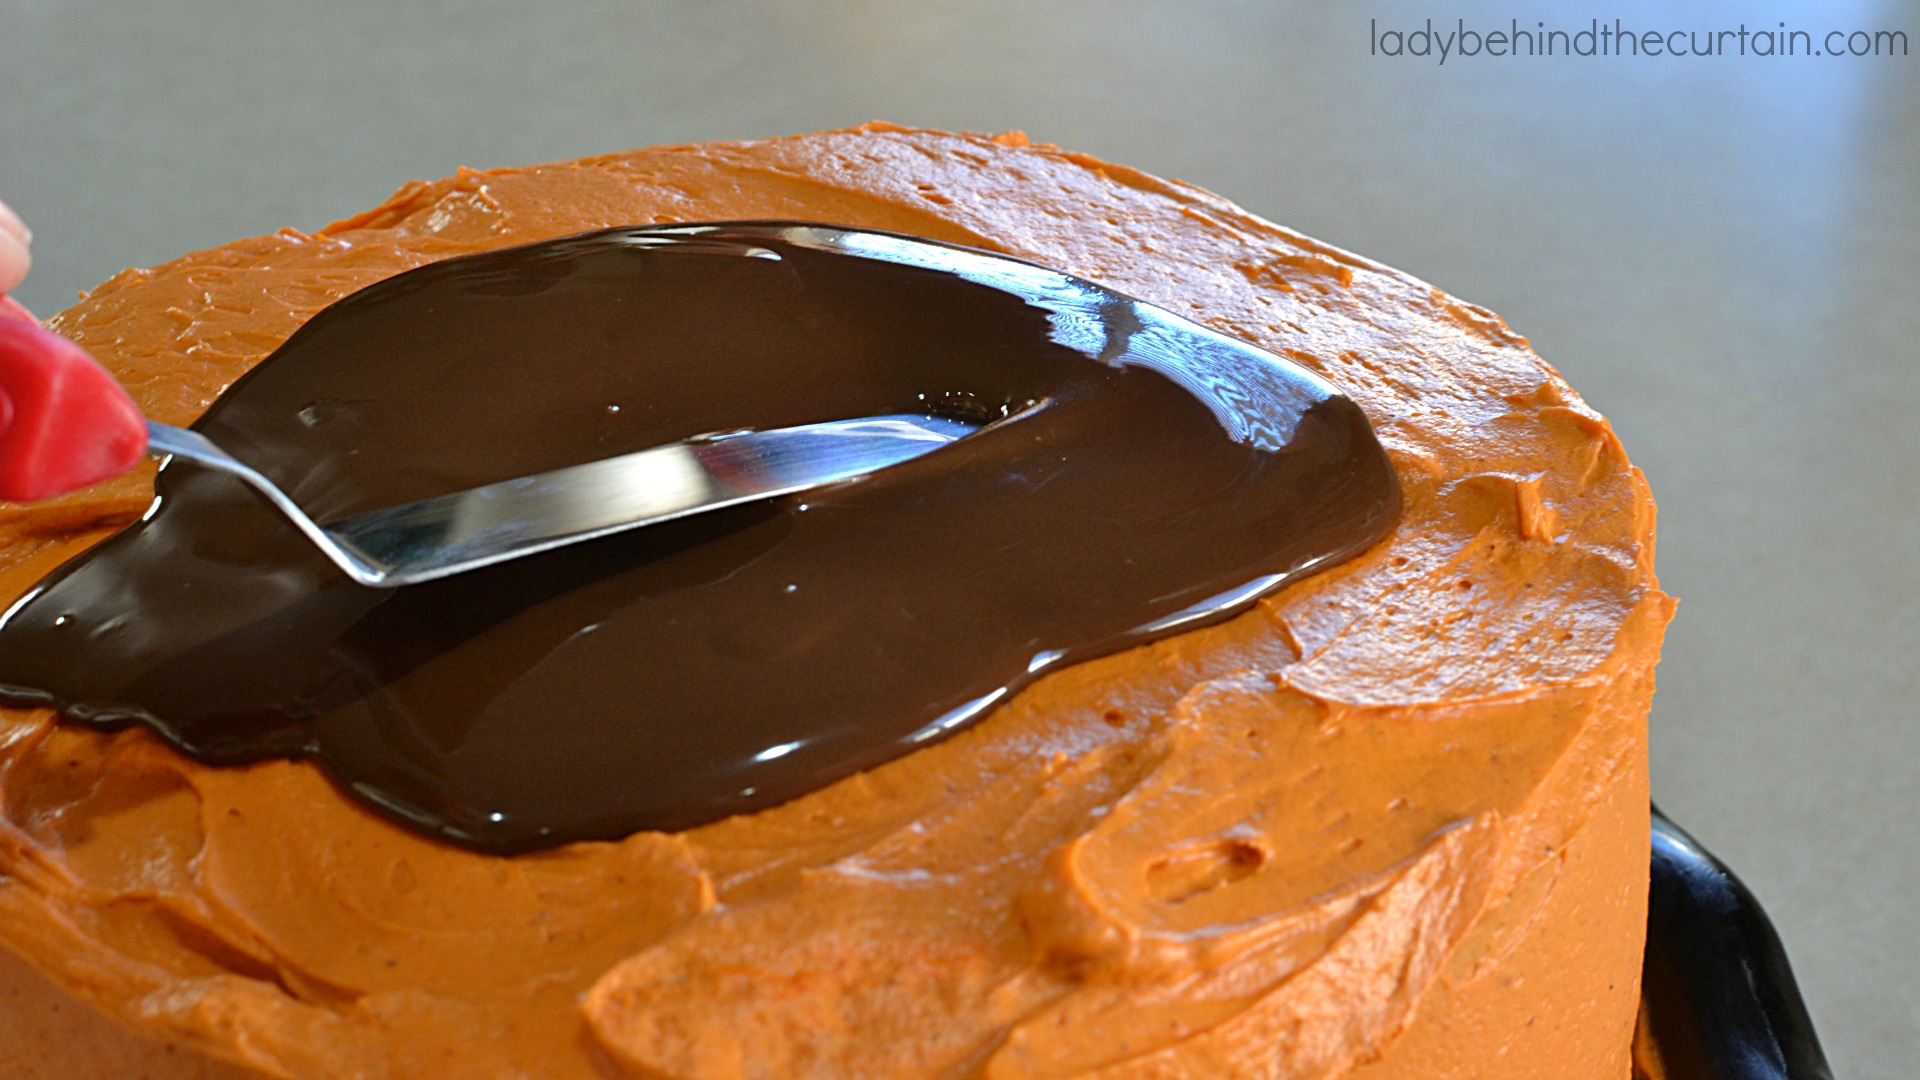 Halloween Chocolate Pumpkin Cake | This cake will be a hit at your Halloween party it not only delivers in flavor but also adds a touch of creepiness to your party table.